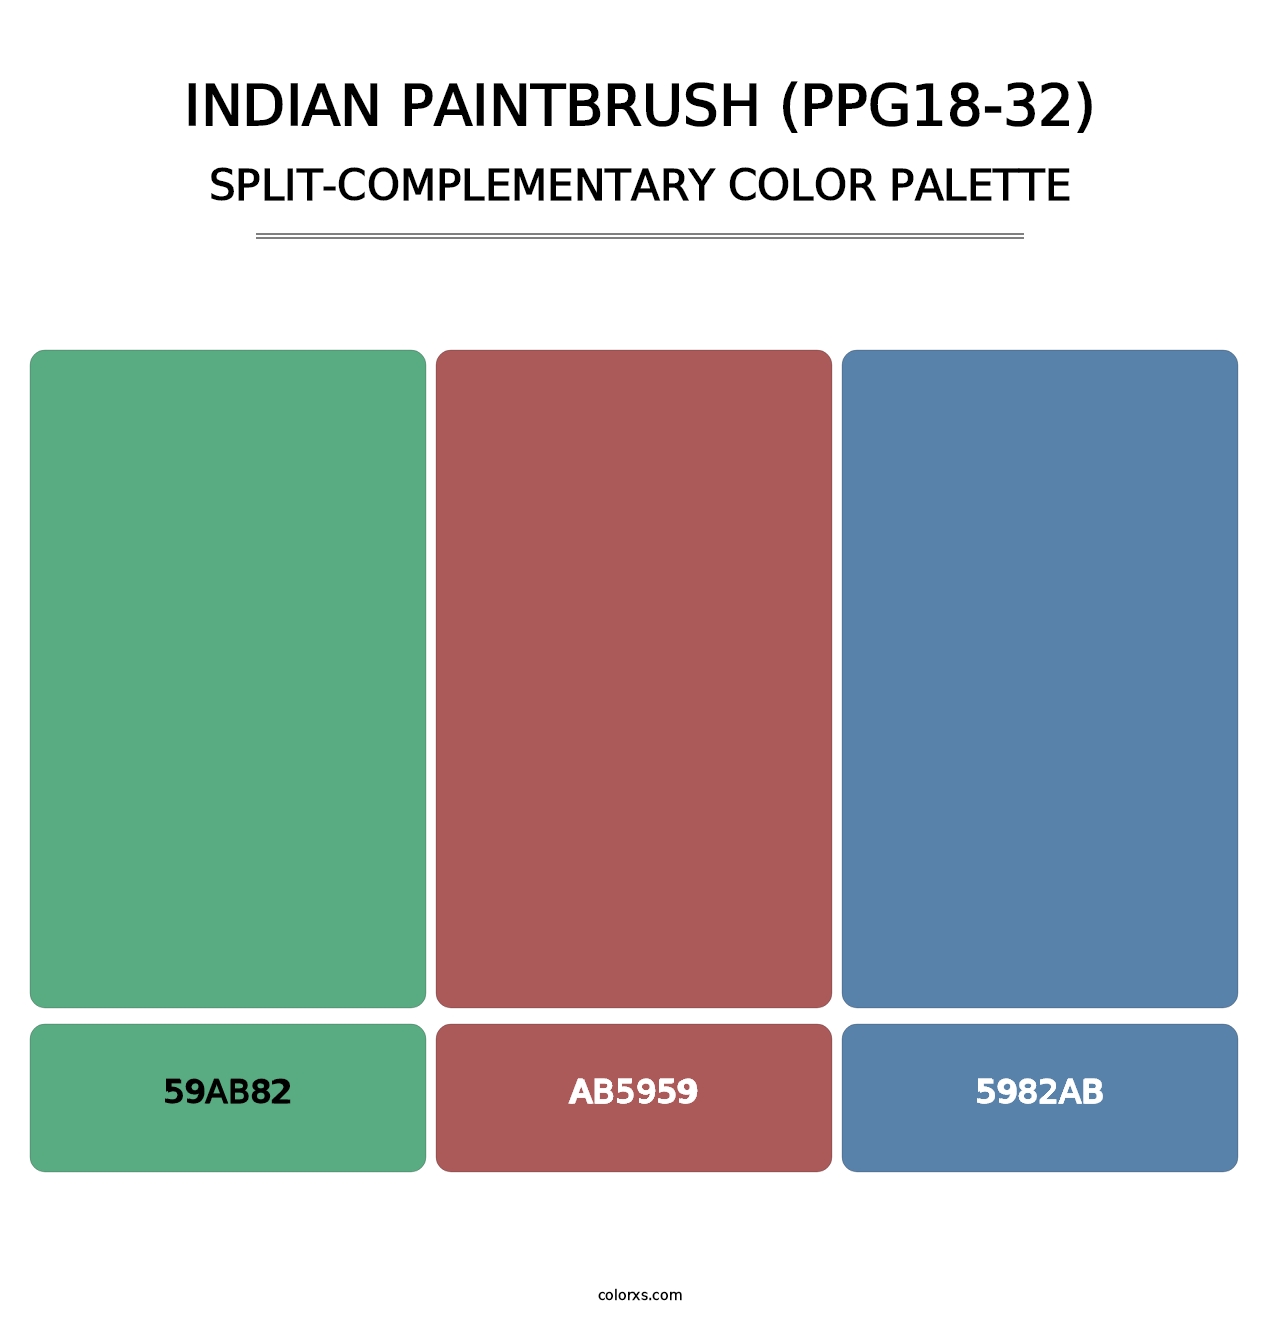 Indian Paintbrush (PPG18-32) - Split-Complementary Color Palette